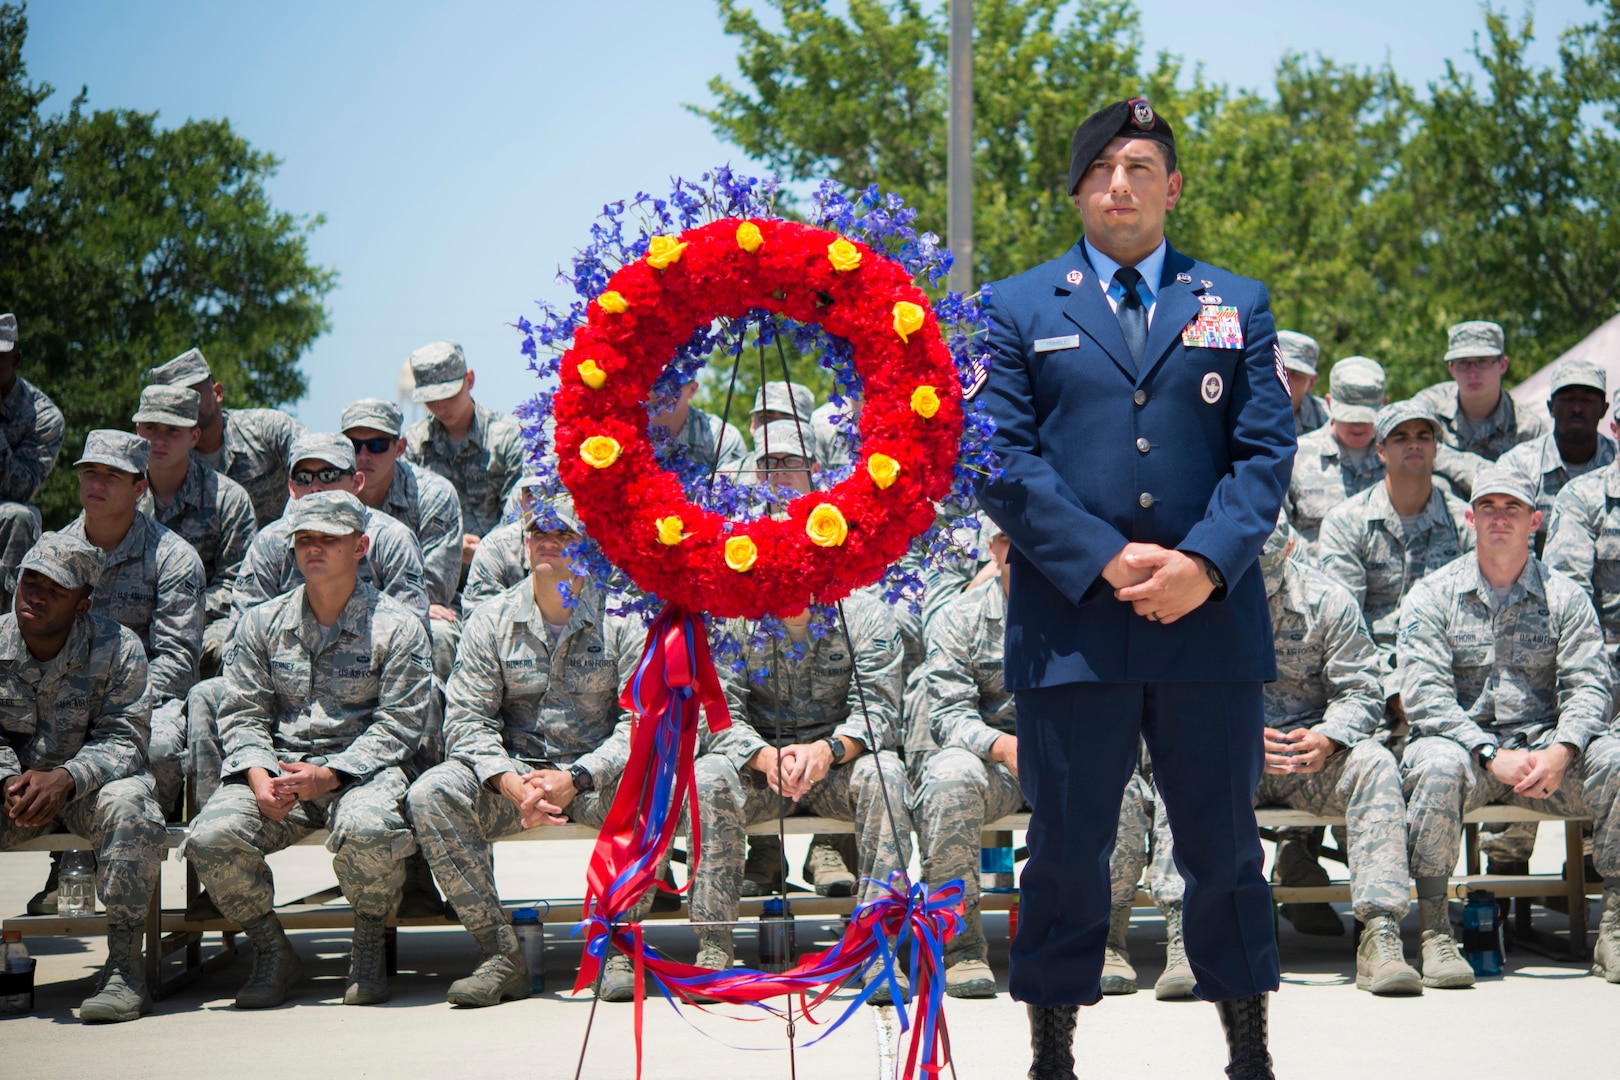 Master Sgt. Jeffery Mader stands next to the wreath during the Tactical Air Control Party Memorial Rededication Ceremony outside the 353rd Battlefield Airmen Training Squadron at the Joint Base San Antonio-Lackland Medina Annex June 23, 2017. Each of the gold roses placed on the wreath represent one of the fallen on the memorial. 